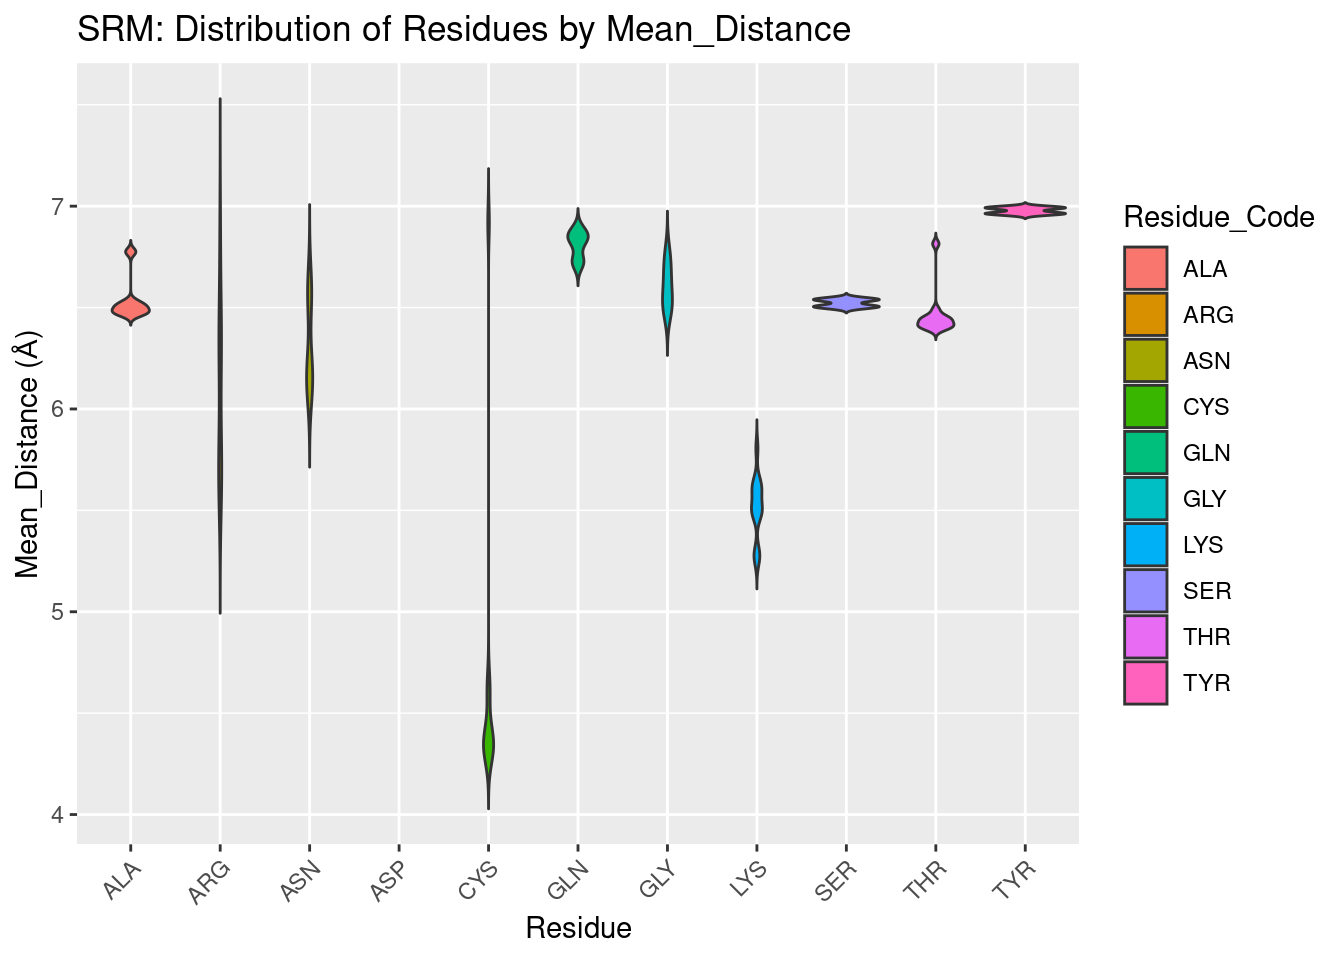 SRM: Residue Distribution by Distance